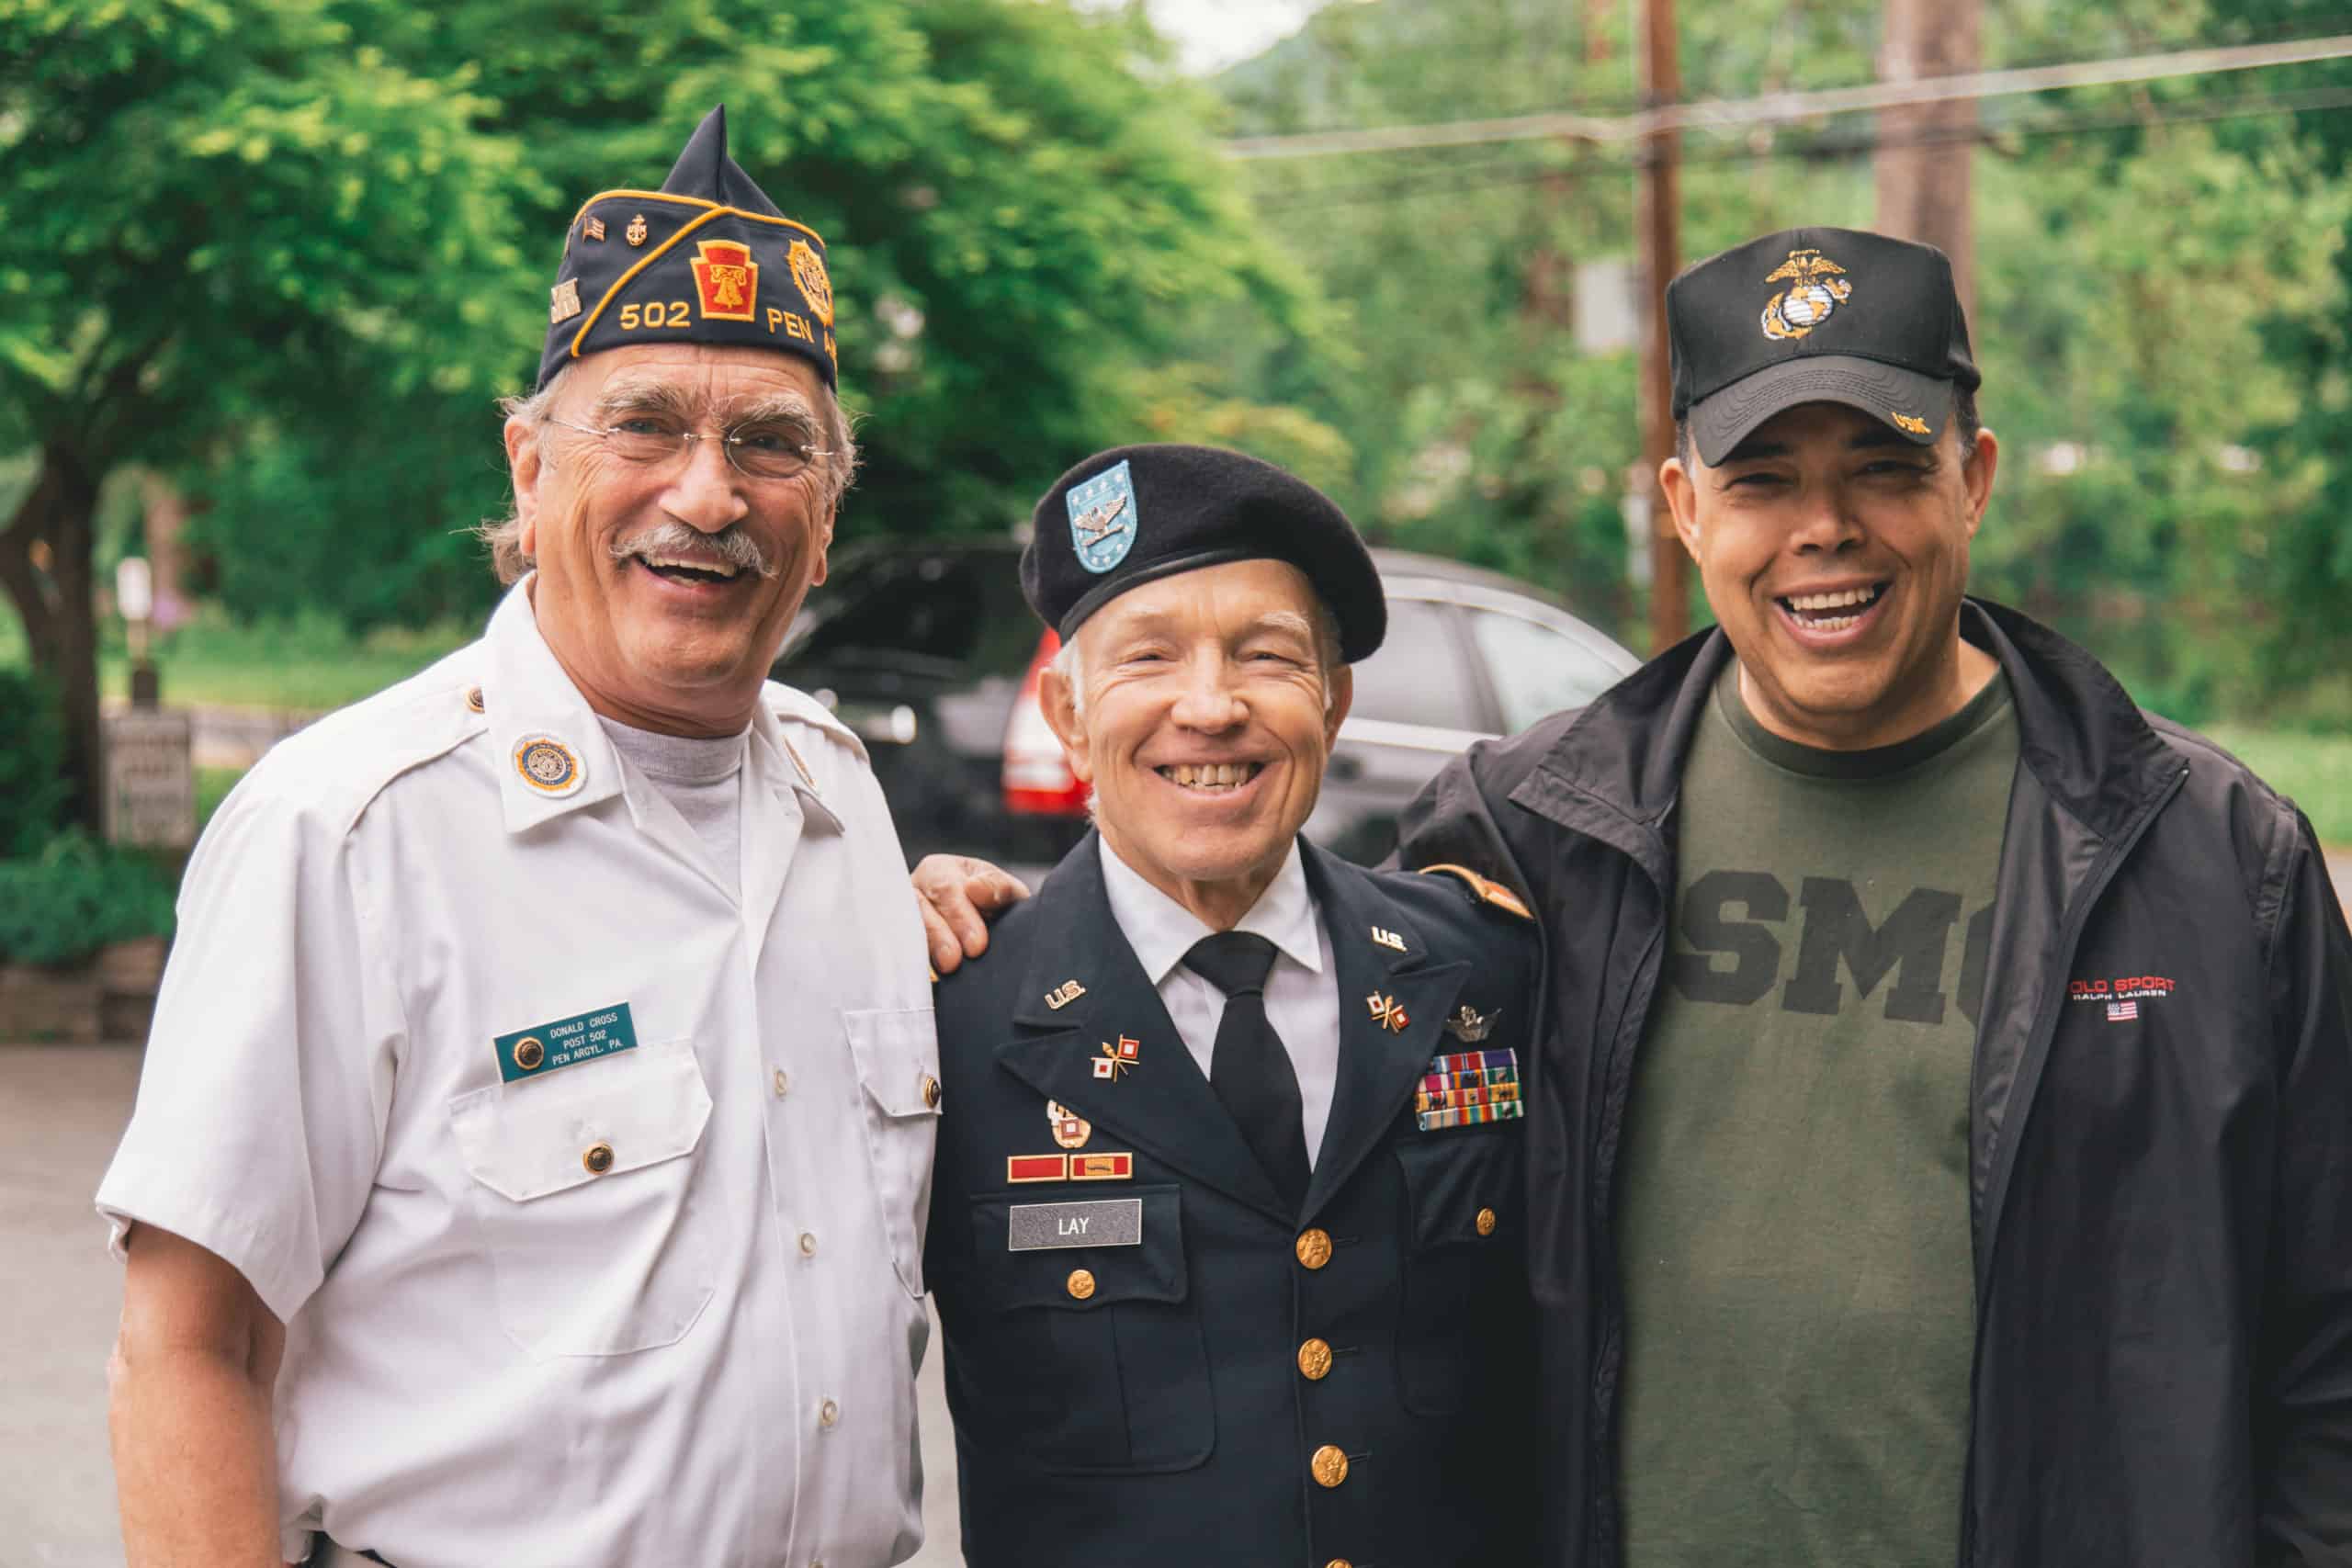 How To Have An Enlightening Conversation With A Veteran